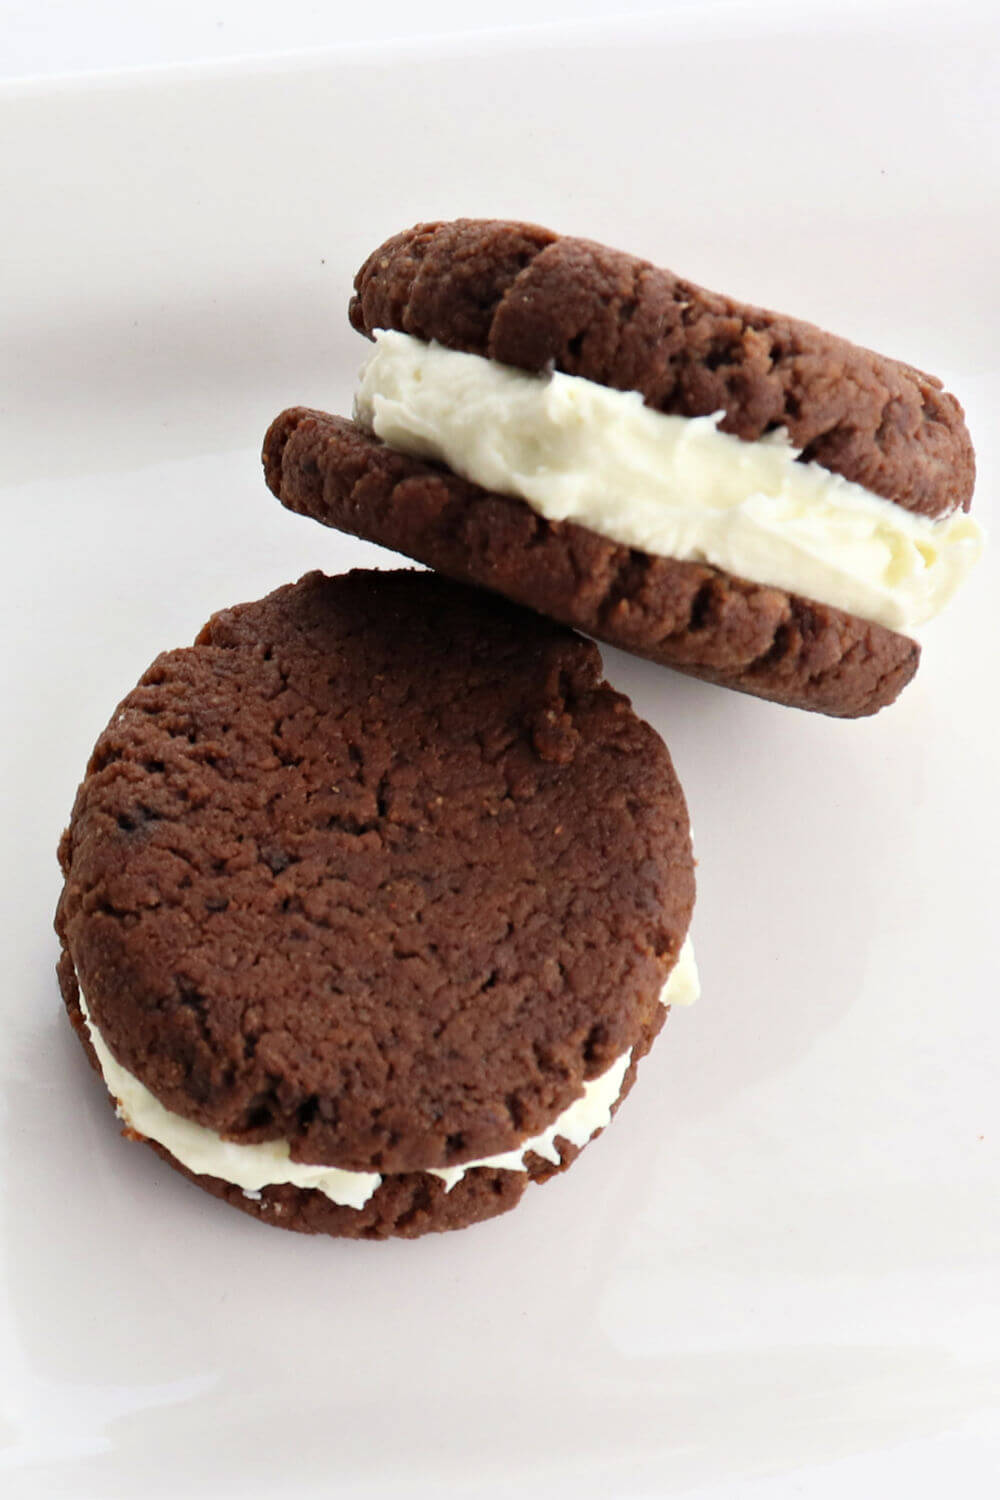 Low carb keto chocolate sandwich cookies on a plate are the perfect gluten-free snack. A cross between a keto oreo and a keto whoopie pie, these sugar-free treats are a family favorite. #ketorecipes #ketocookies